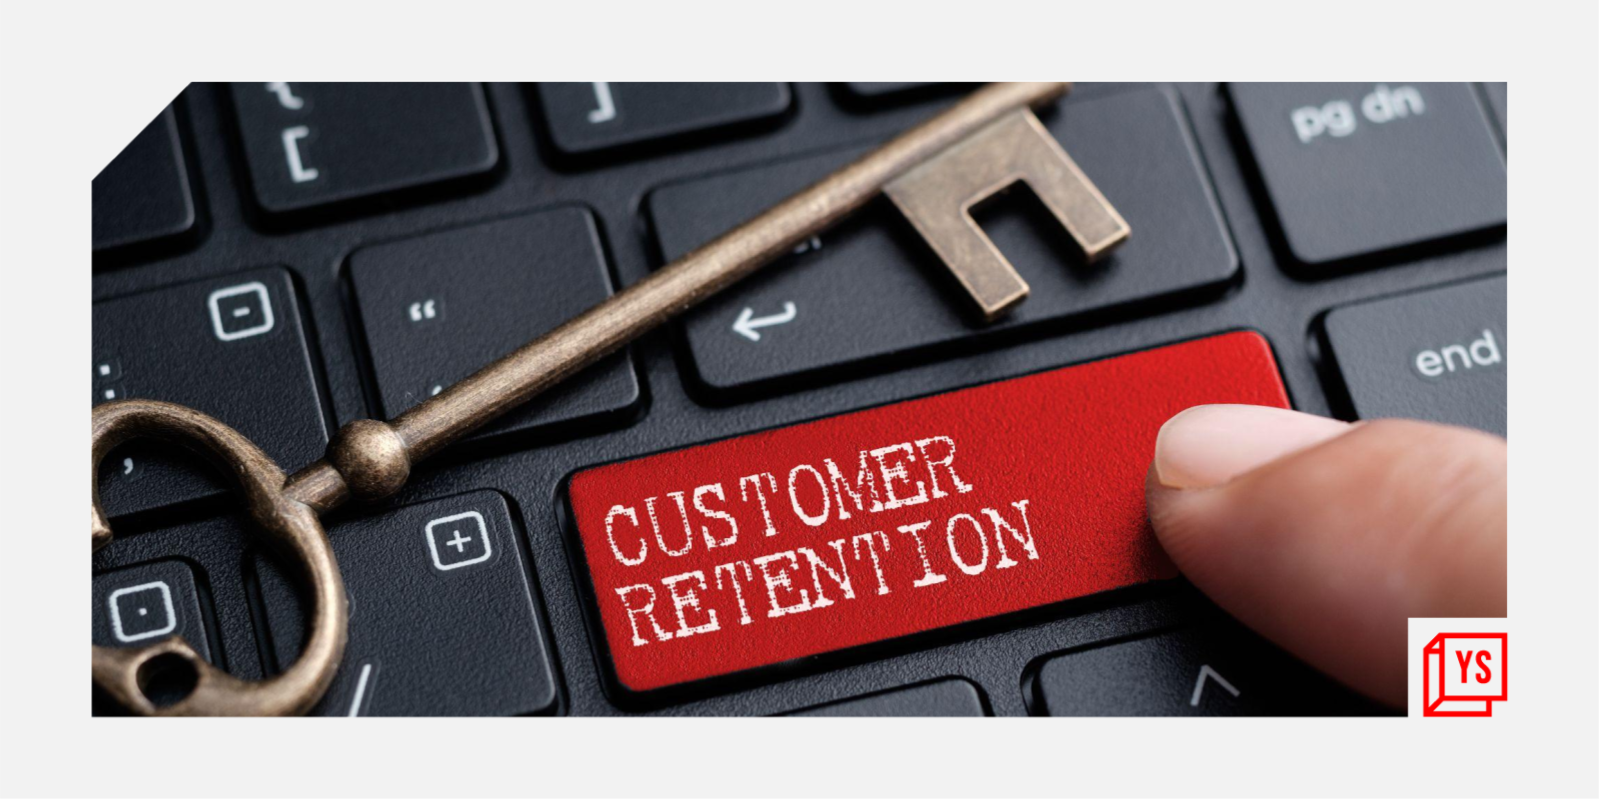 Catch them? Yes! But retain them? Why companies are hounding customers

